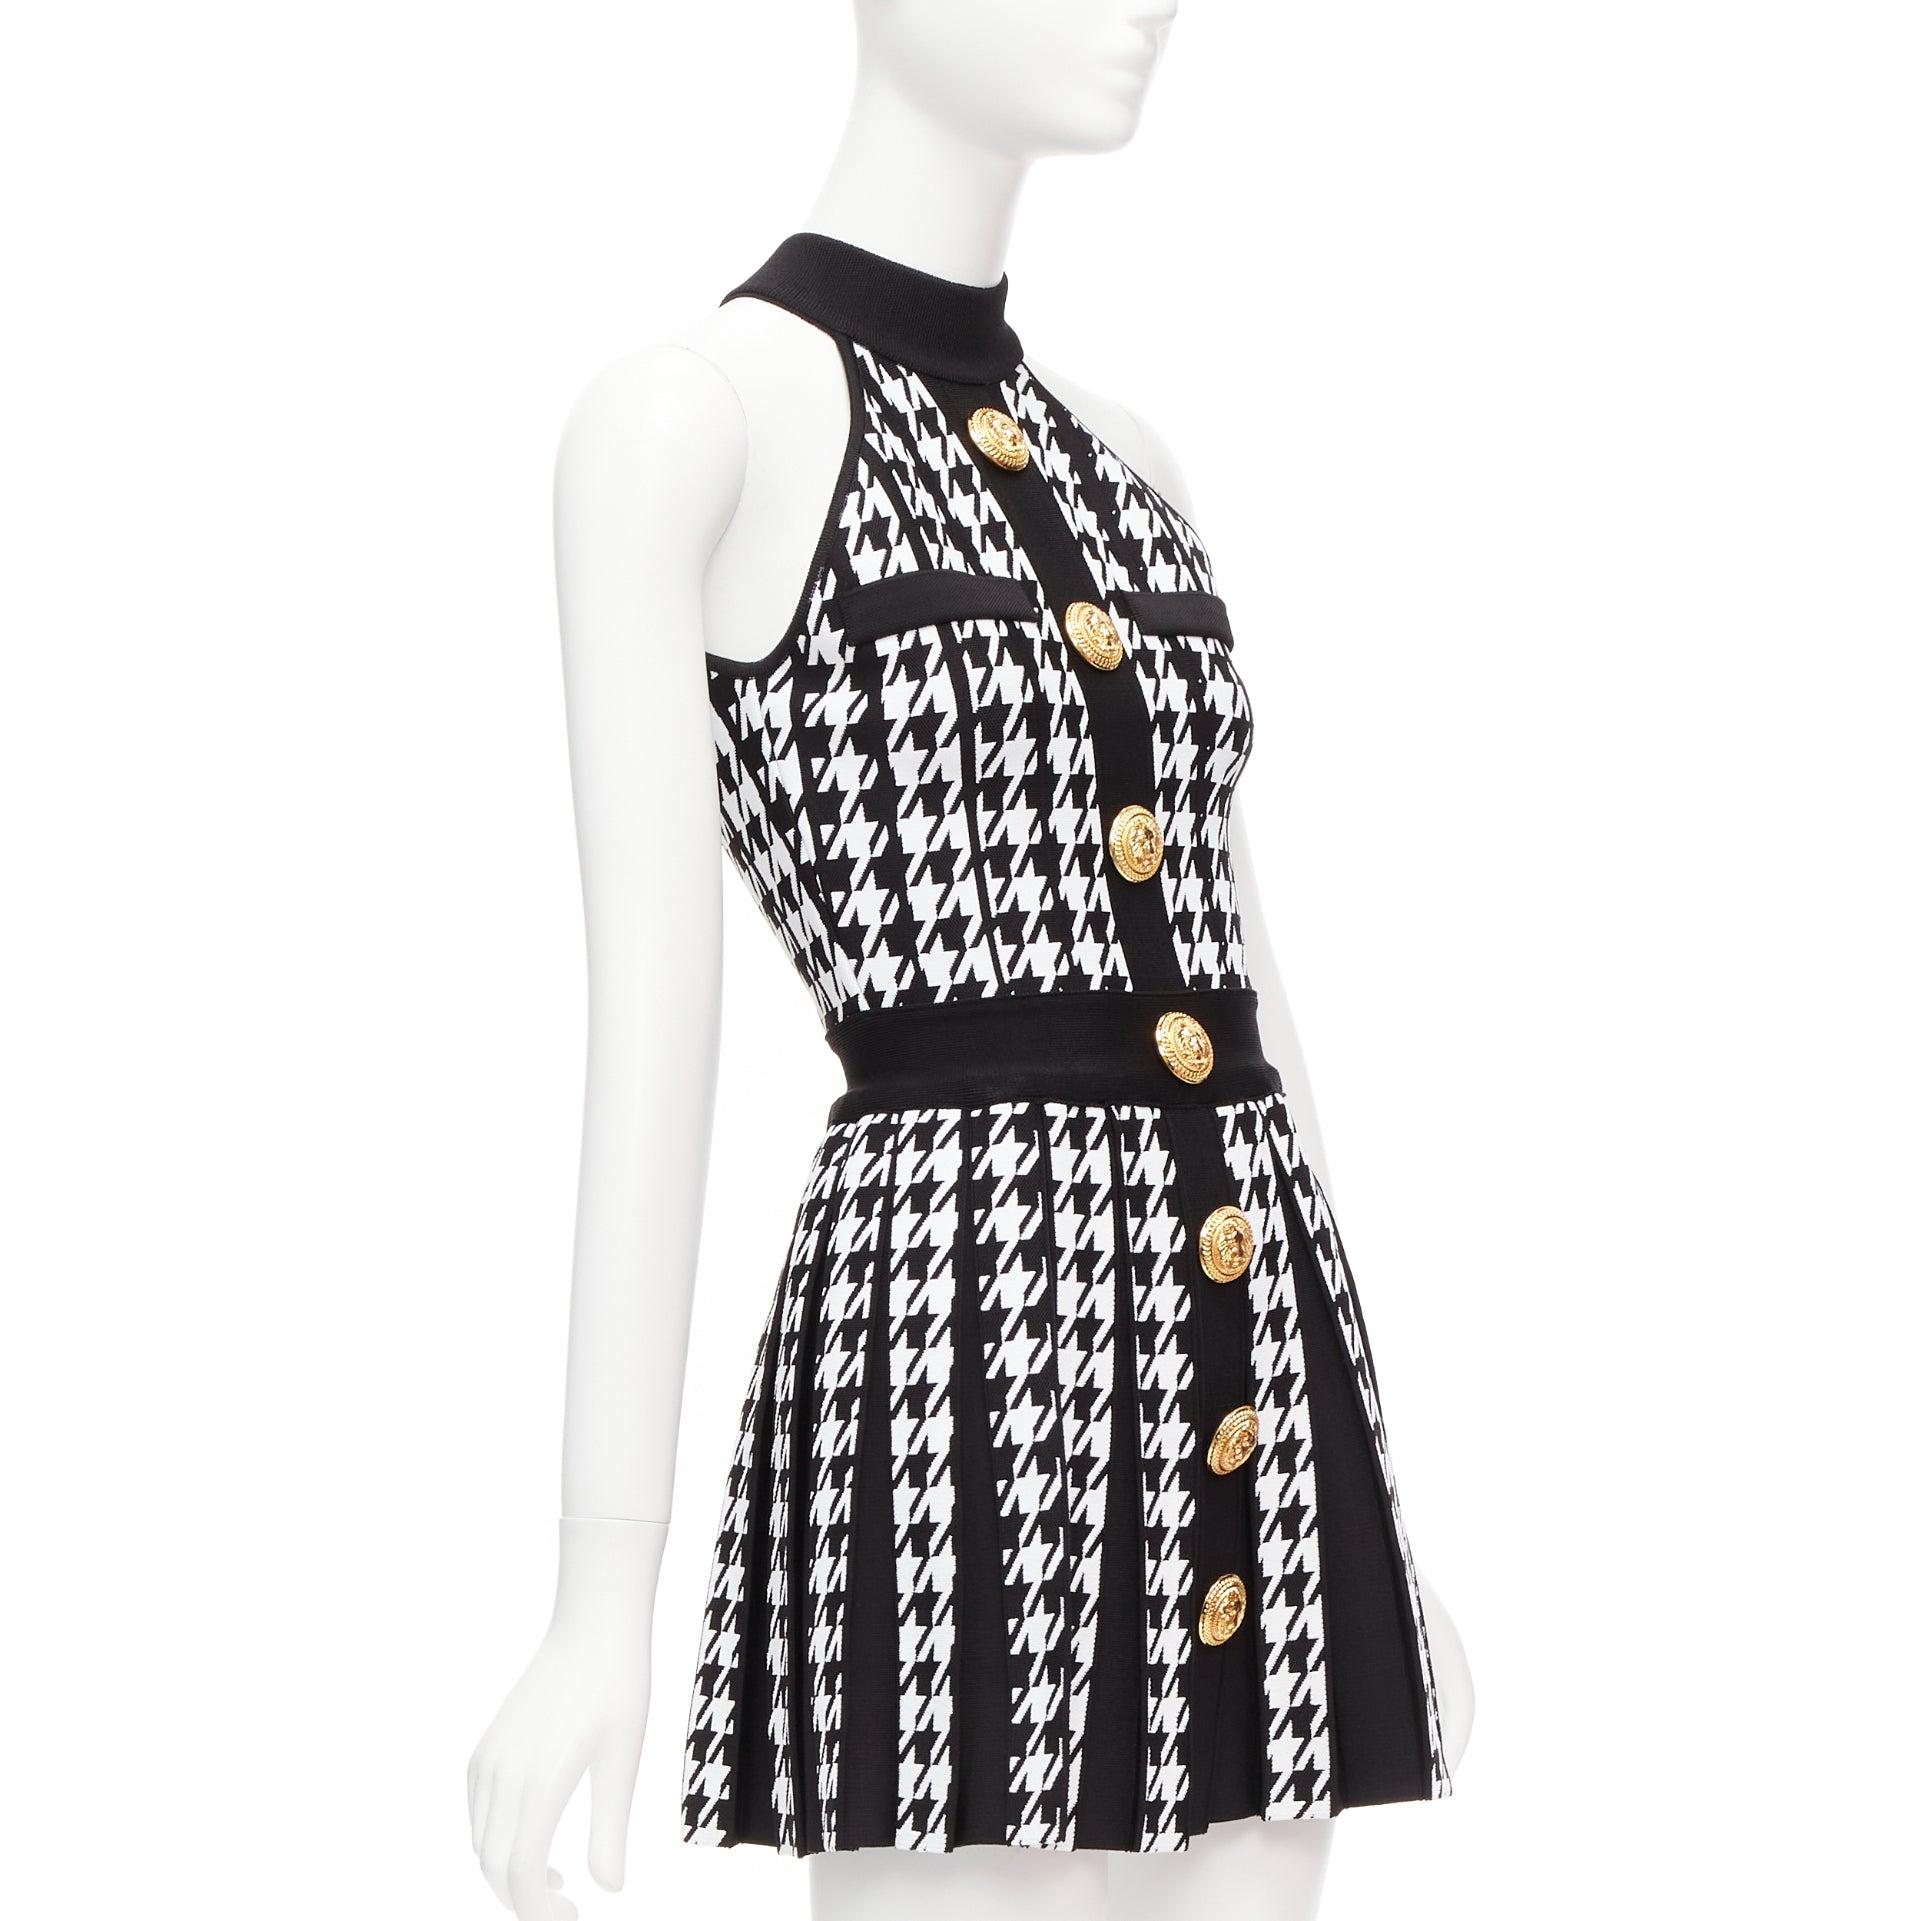 BALMAIN 2023 black white houndstooth gold lion button halter mini dress FR34 XS
Reference: AAWC/A00701
Brand: Balmain
Designer: Olivier Rousteing
Collection: 2023
Material: Viscose, Polyamide
Color: Black, White
Pattern: Houndstooth
Closure: